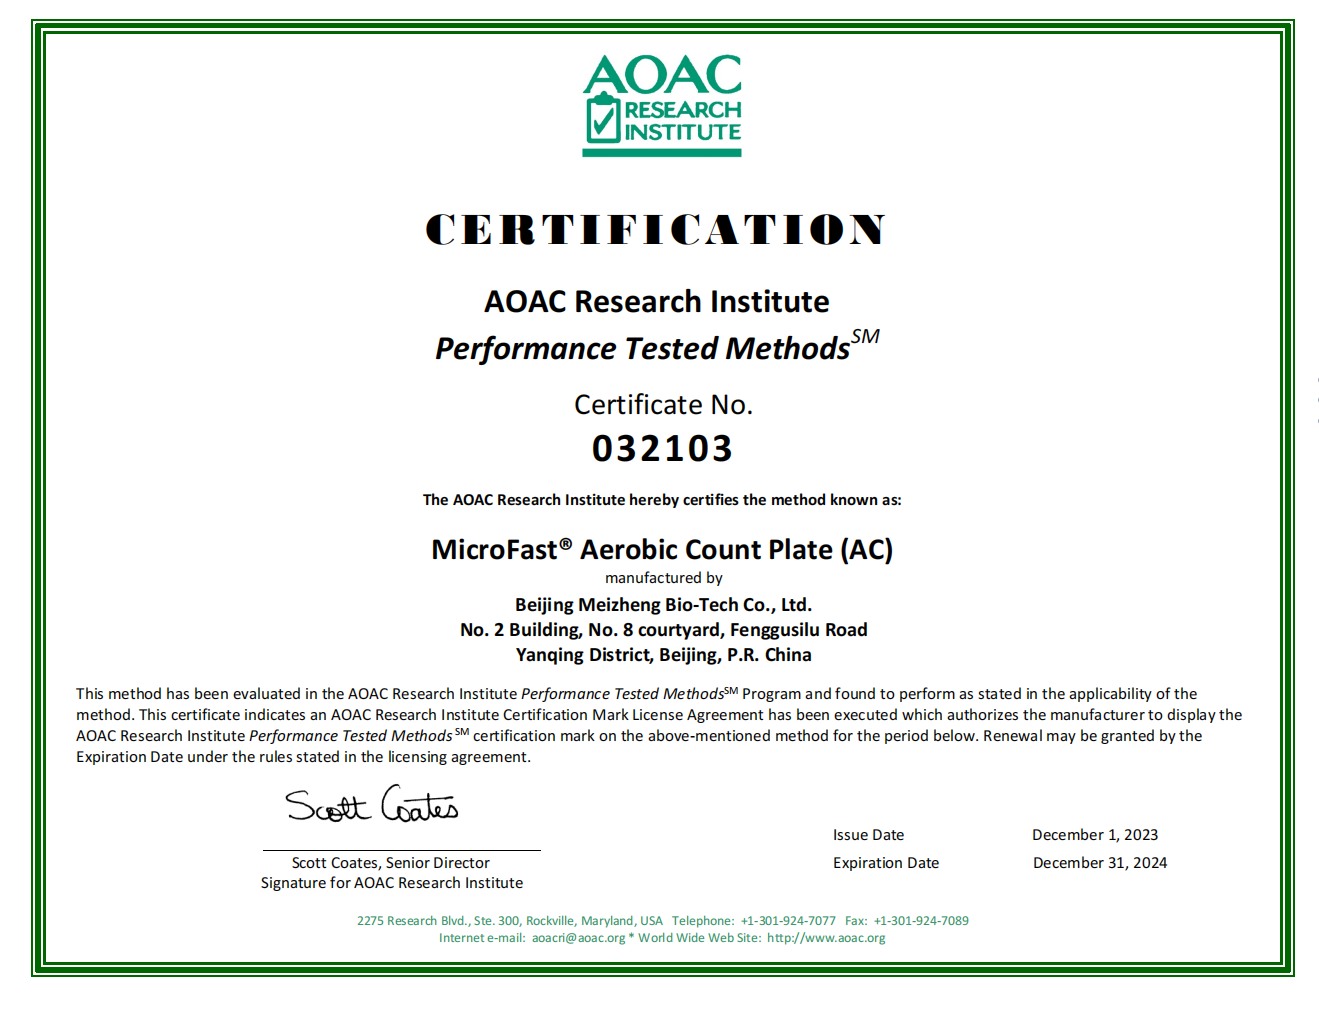 AOAC Certificate of MicroFast®Aerobic Count Plate